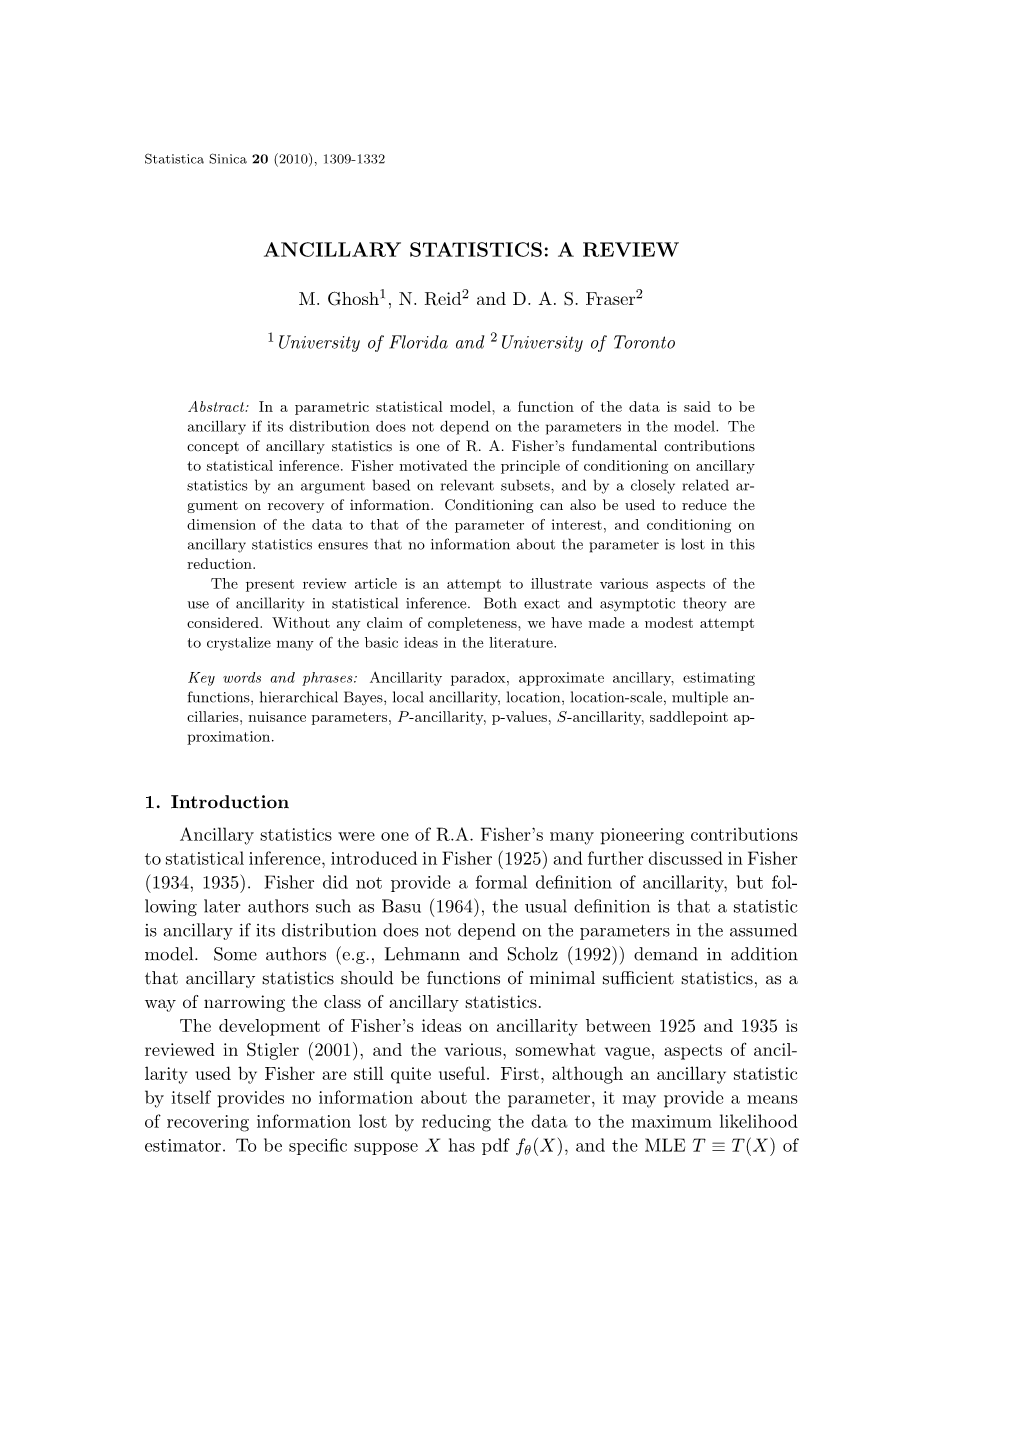 Ancillary Statistics: a Review